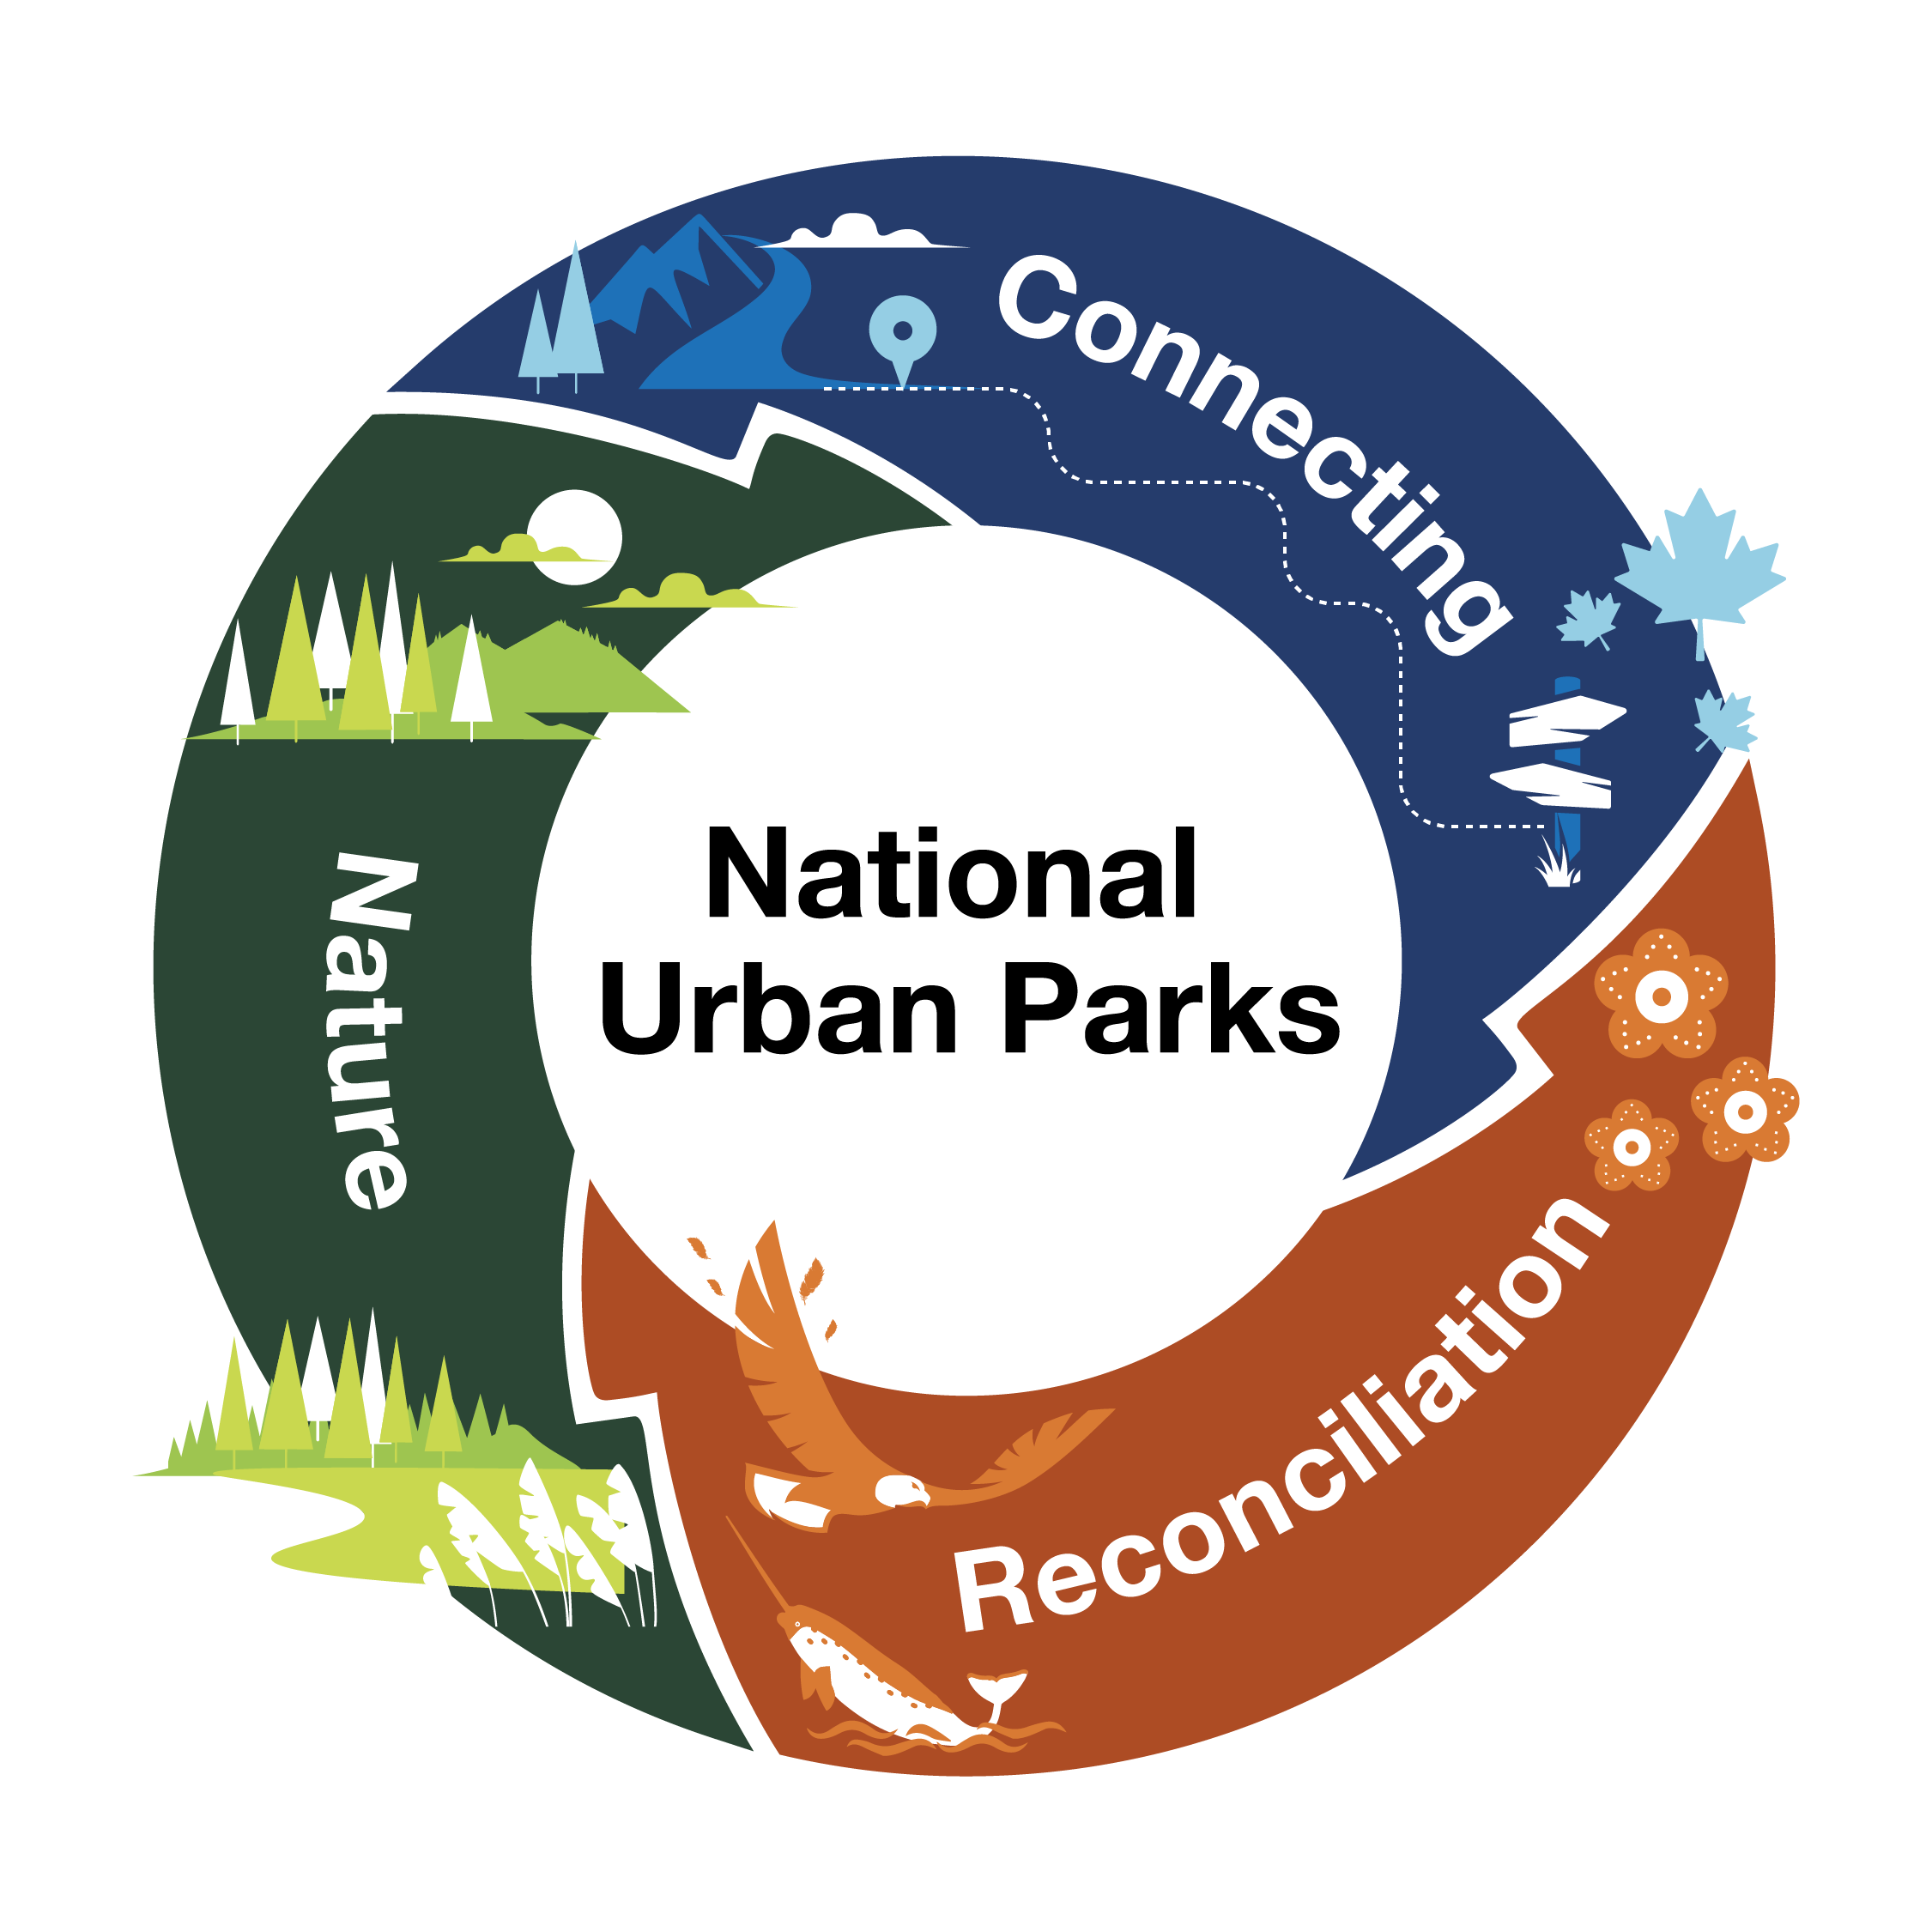 The words ‘National Urban Parks’ surrounded by a circular coloured ring with the words nature, connection and reconciliation.